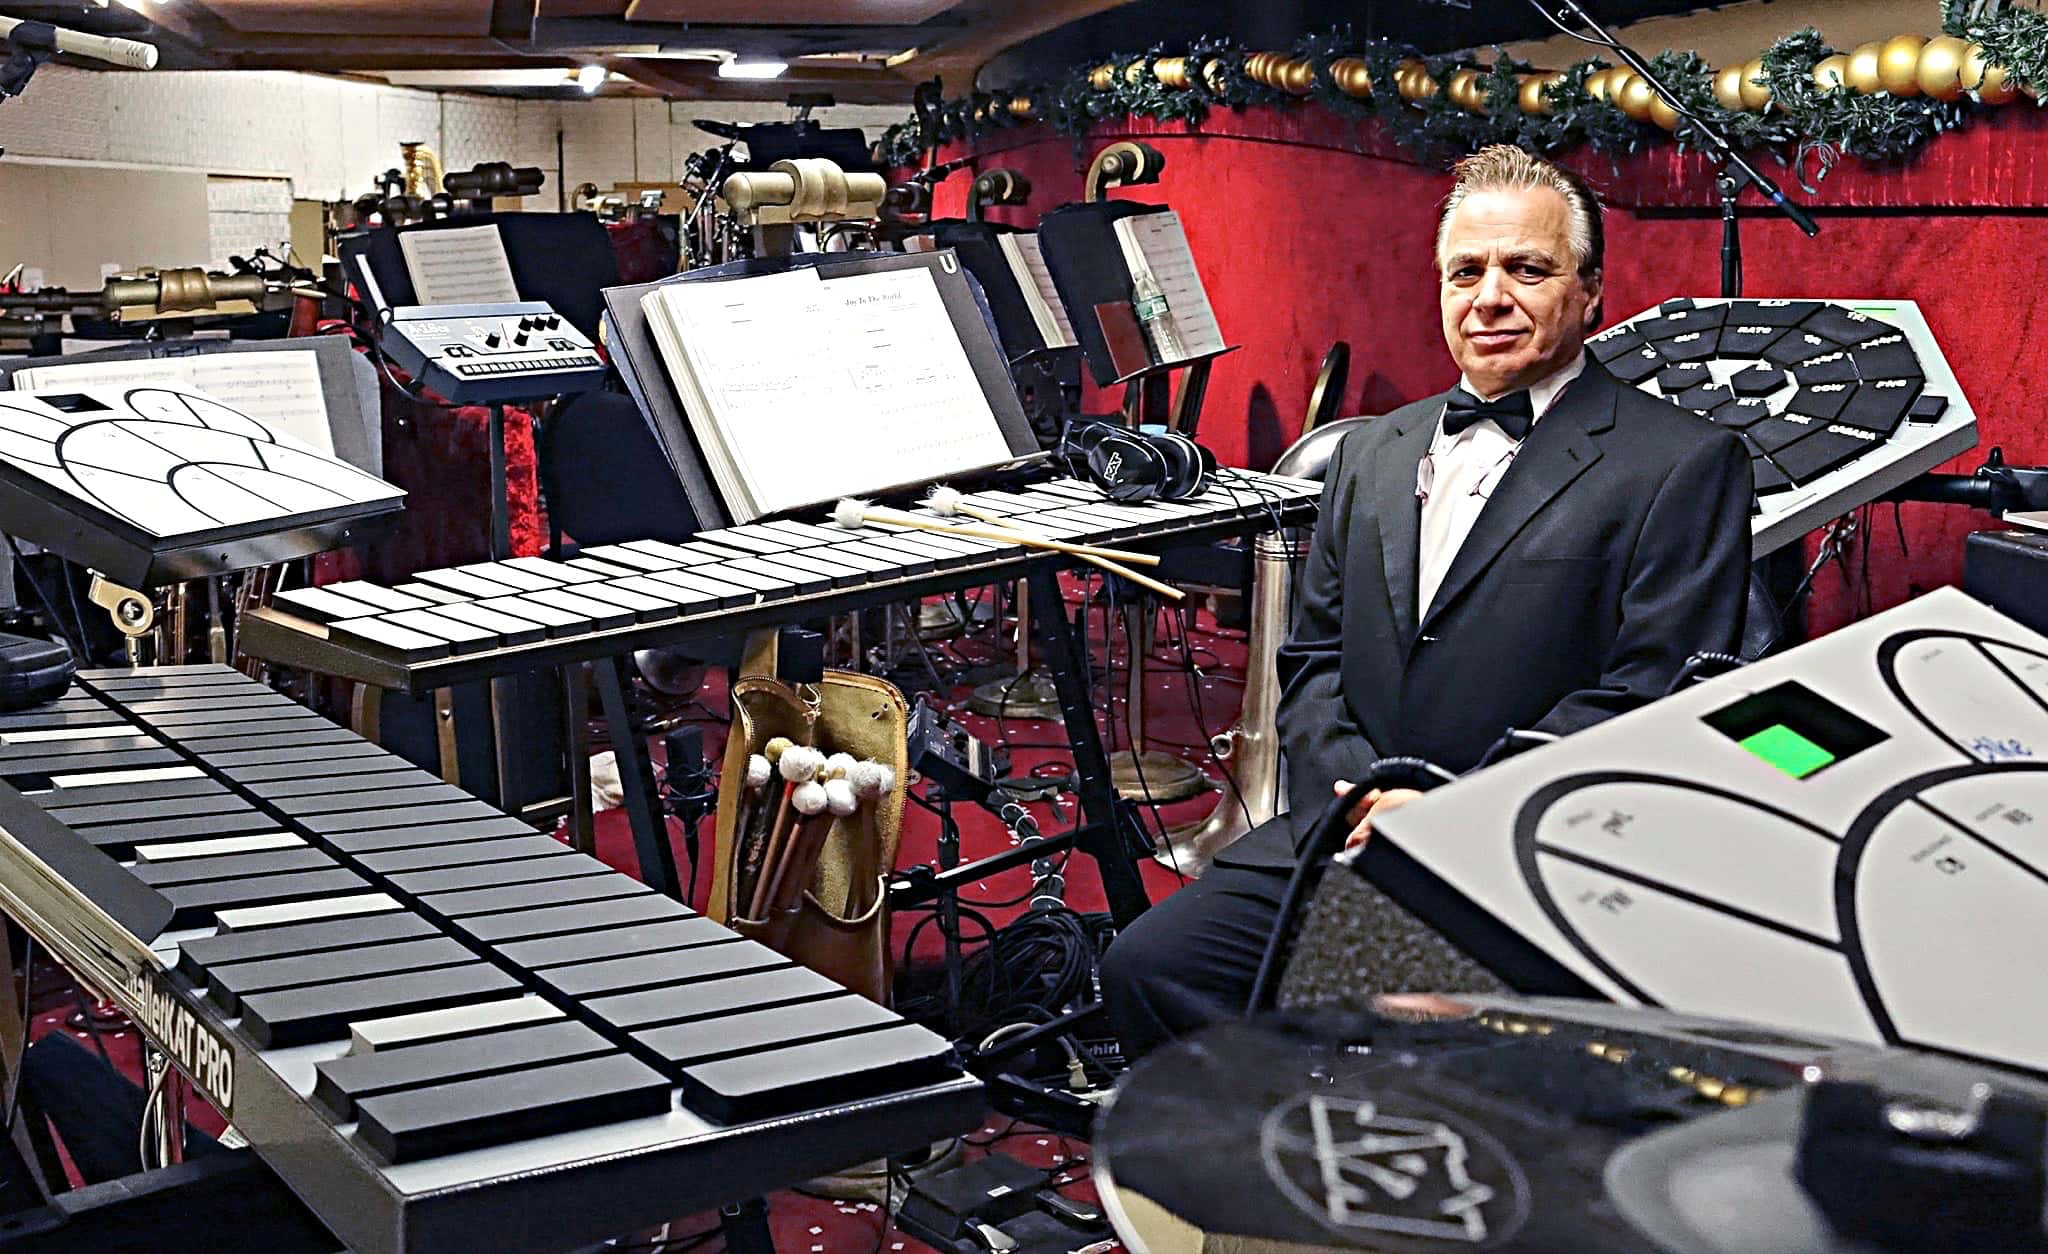 Mario DeCiutiis, Dave Roth, and Matt Beaumont’s percussion setup for the Radio City Christmas Spectacular in New York City.